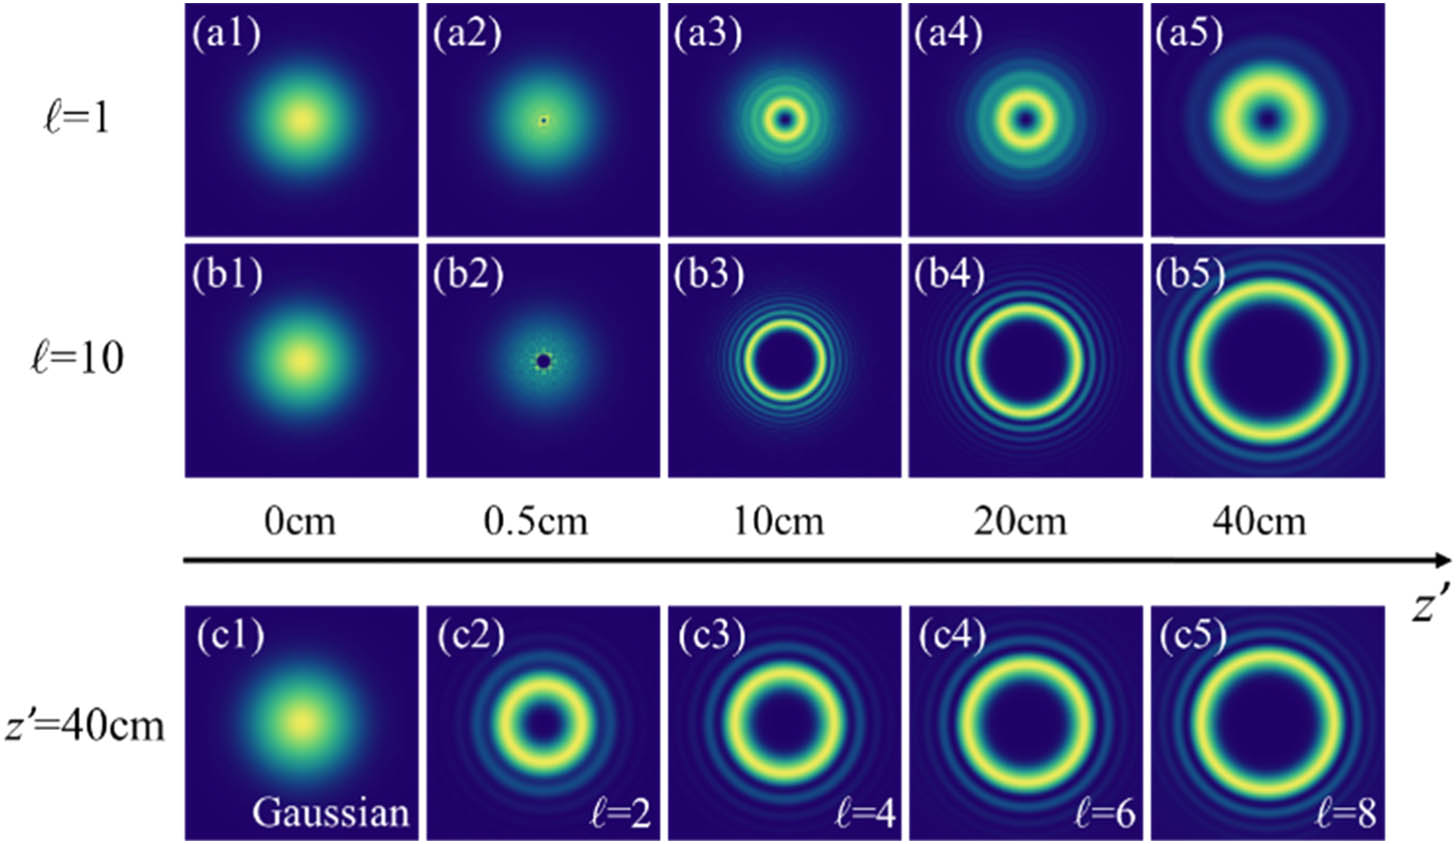 Simulation results. The propagation evolution in free space of the vortex beam with l=1 (a1)–(a5) and l=10 (b1)–(b5), respectively. The intensity distributions of the (c1) Gaussian-shaped pump beam and (c2)–(c5) OAM-carrying Stokes signal beams with different orders at the propagating distance of 40 cm, respectively.